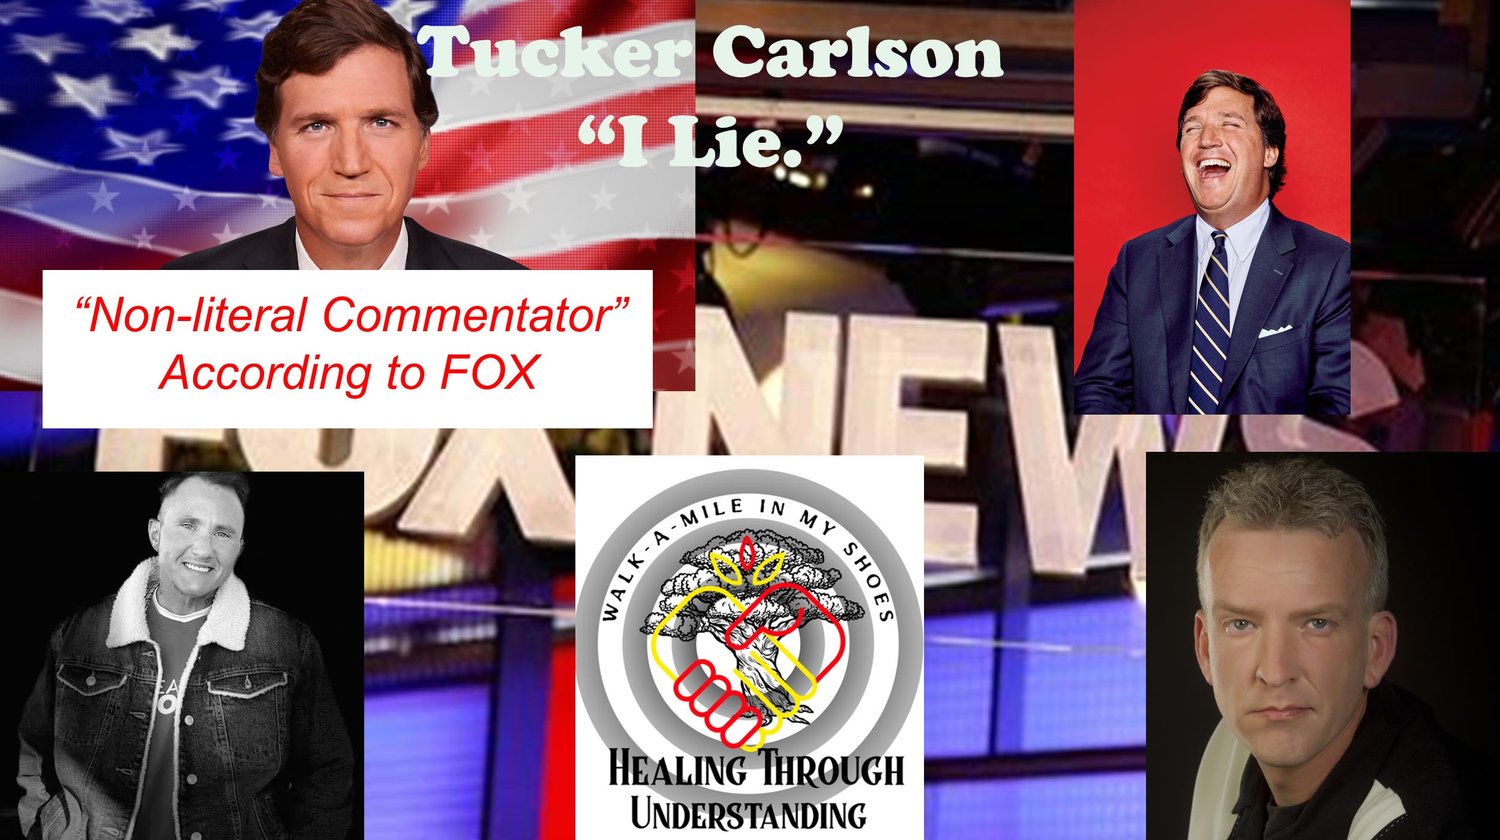 Tucker Carlson: Fox Says He is Dishonest. He Says He Lies. Where is His Value?